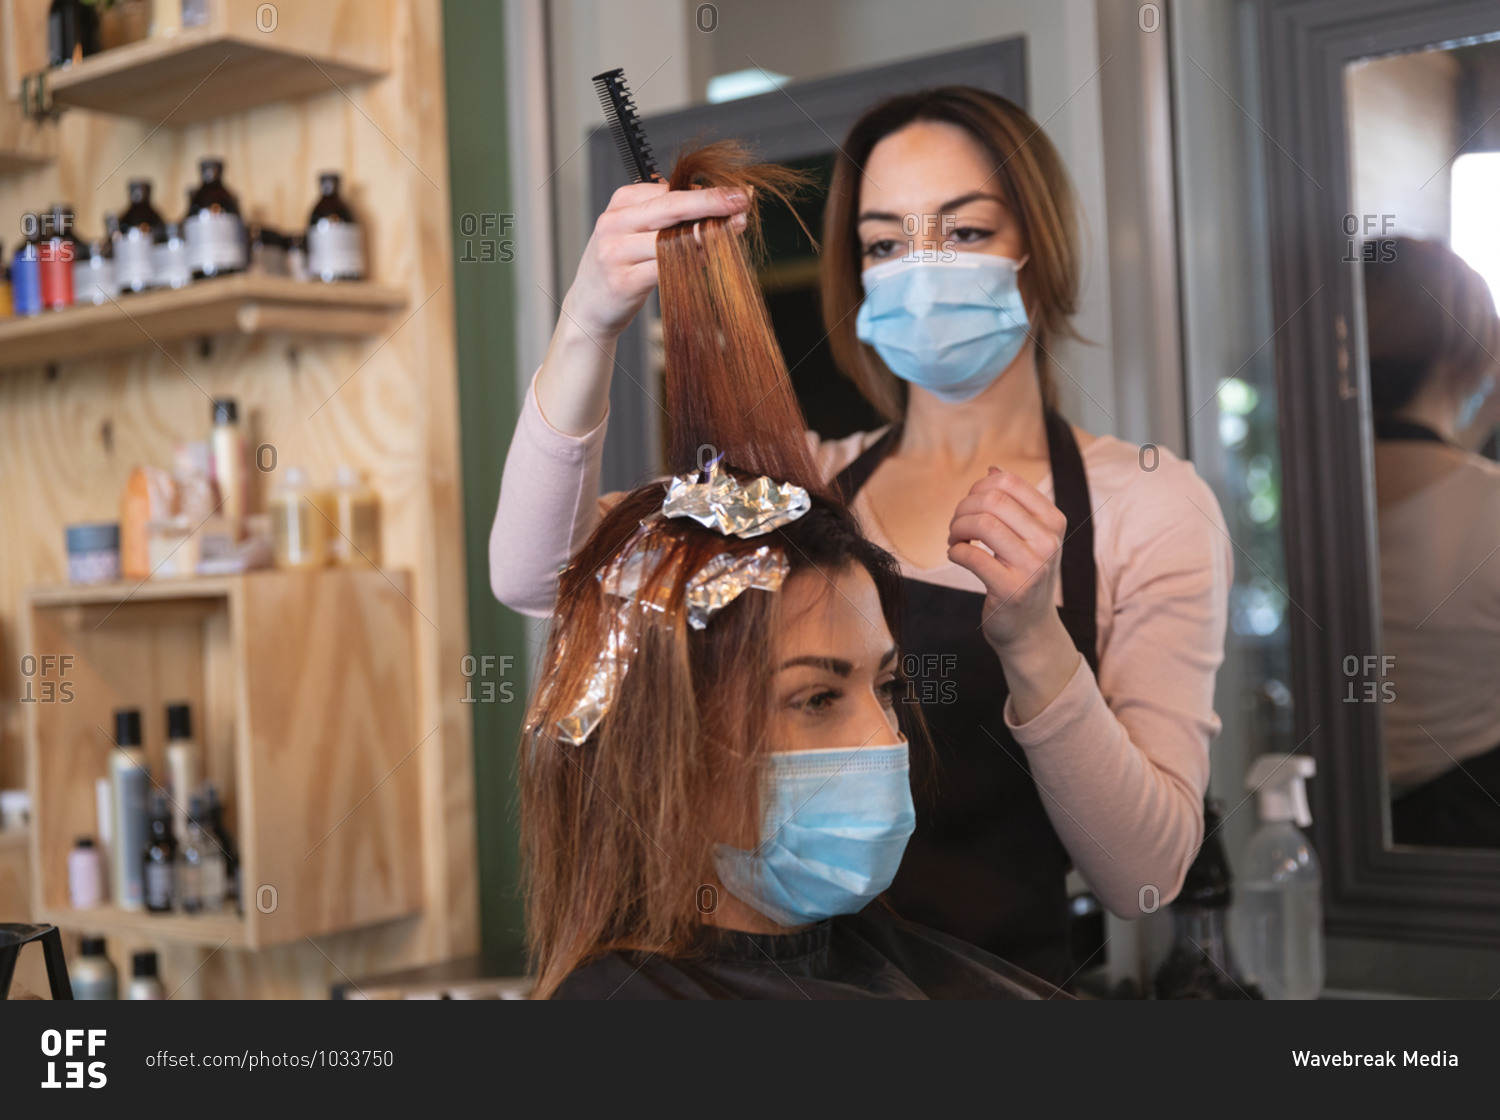 Caucasian female hairdresser working in hair salon wearing face mask, dying hair of female Caucasian customer in face mask. Health and hygiene in workplace during Coronavirus Covid 19 pandemic.